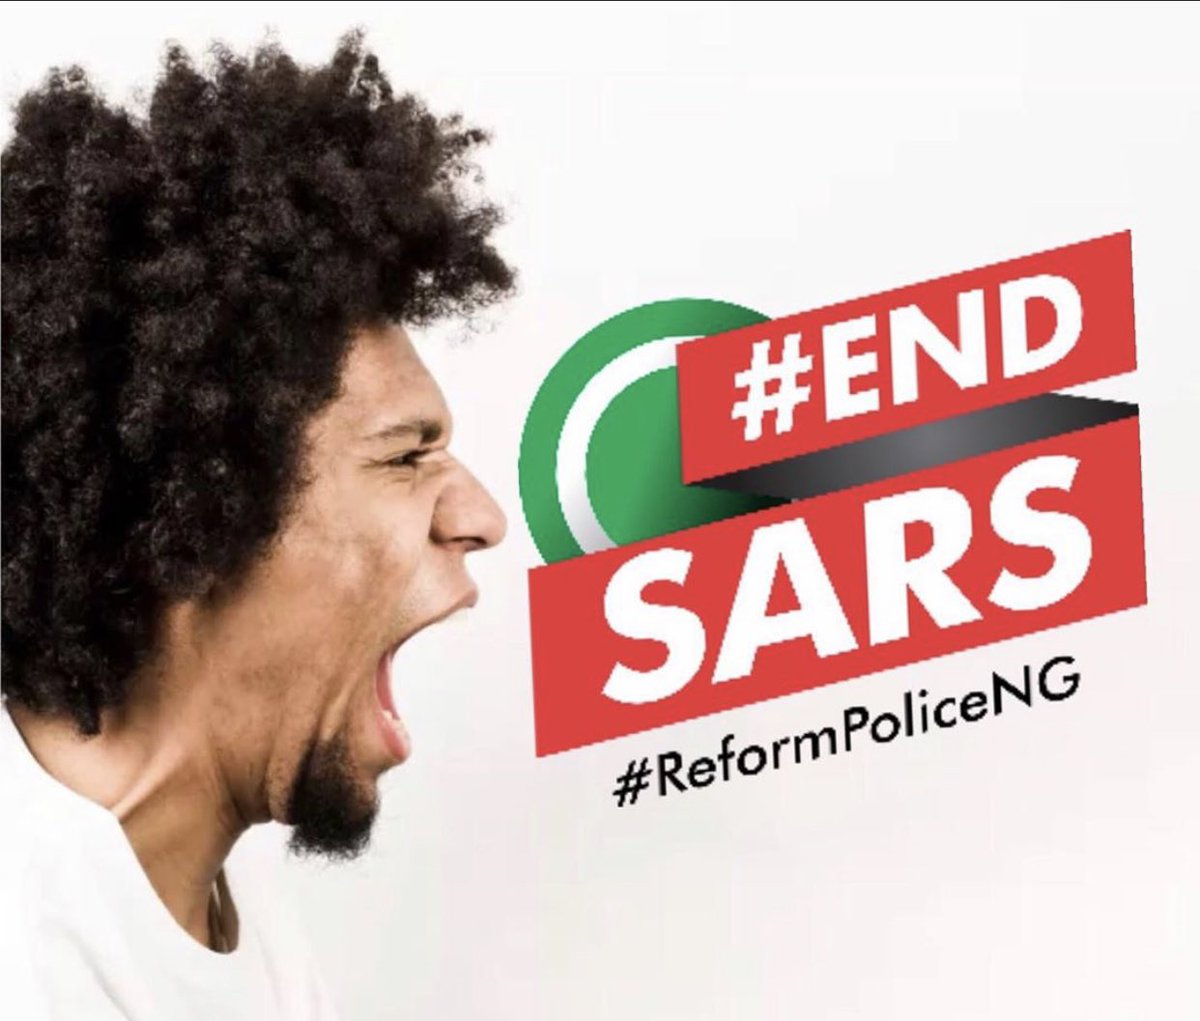 “We want SARS to End!”  #EndSARS    #ReformPoliceNG SARS has ended! STS & IRT shutdown across Nigeria & restricted to Abuja. Cases against them are being looked into & data on the complaints since 2015 to 2019 will be released shortly. The issue here has factual & historical reality.